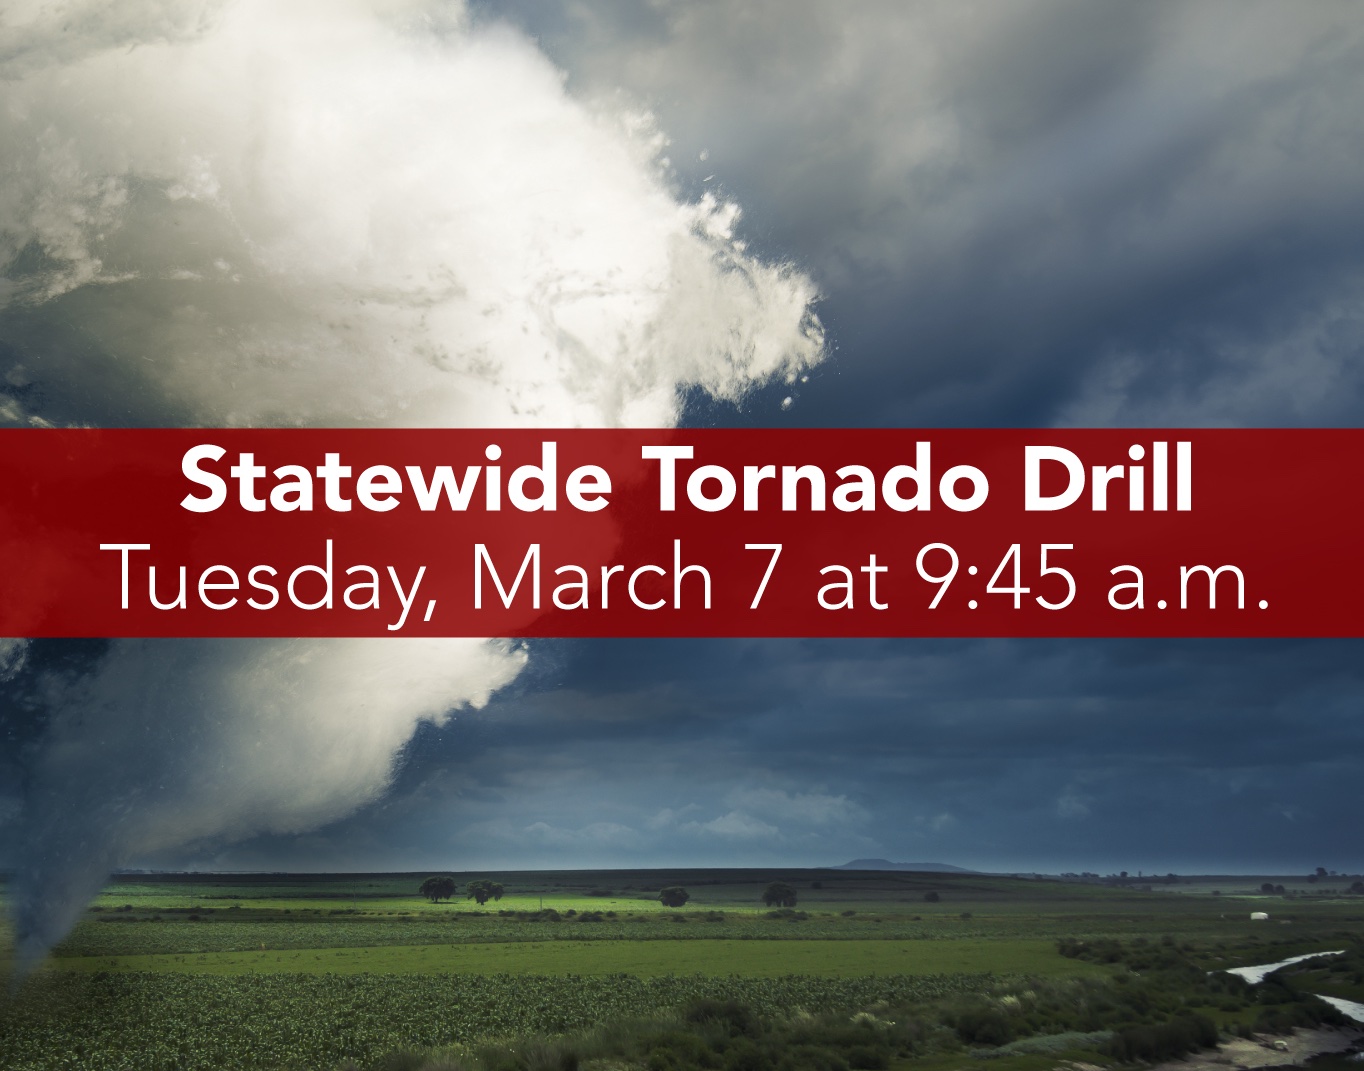 Statewide Tornado Drill - Tuesday, March 7, 9:45 a.m.